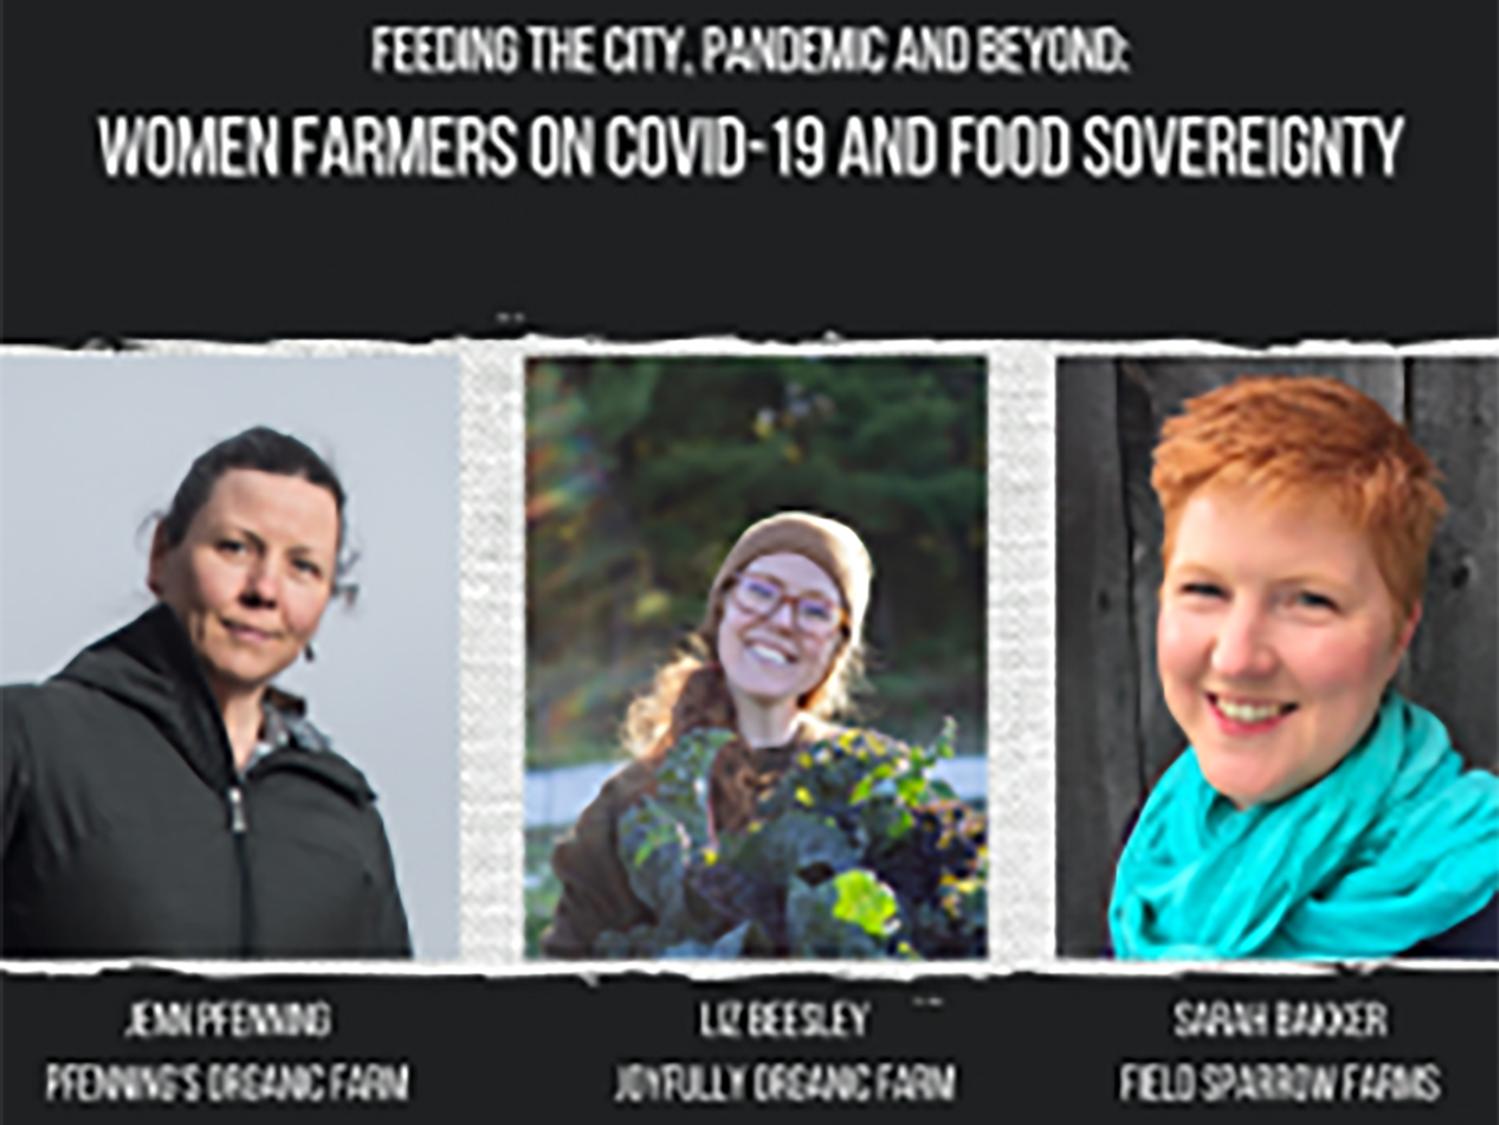 Feeding the City: Women Farmers on COVID-19 and Food Sovereignty 